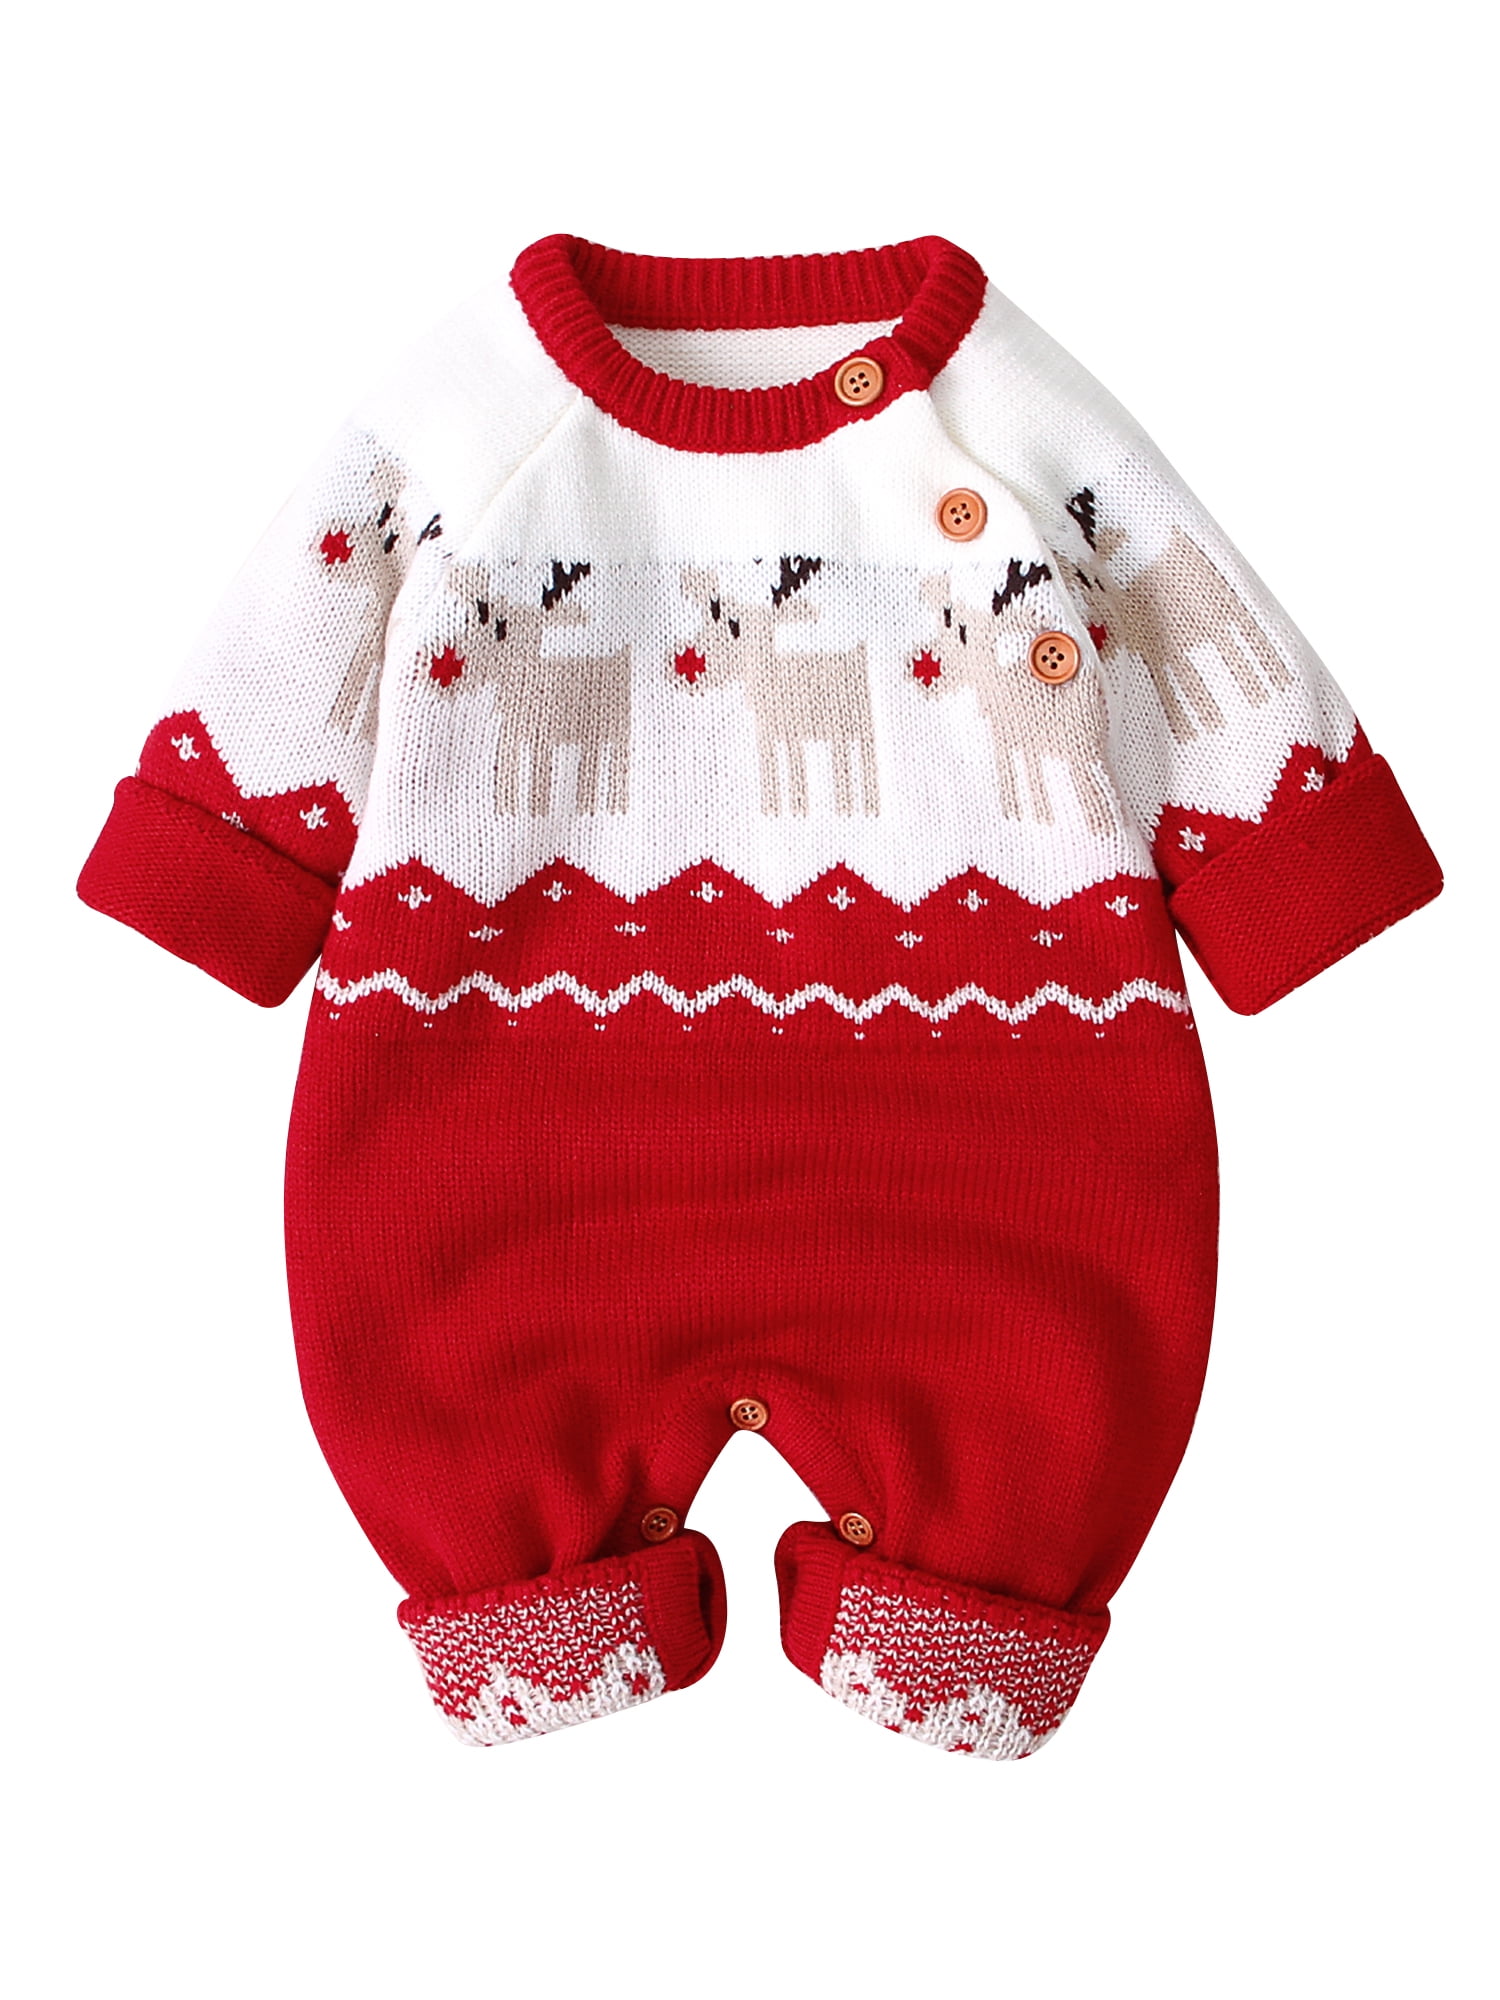 ZOEREA Toddler Baby Sweater Romper Knitted Christmas Deer Shoulder Strap Cotton Sweatshirt for 0-24 Months Infant Kids Jumpsuits Outerwear 